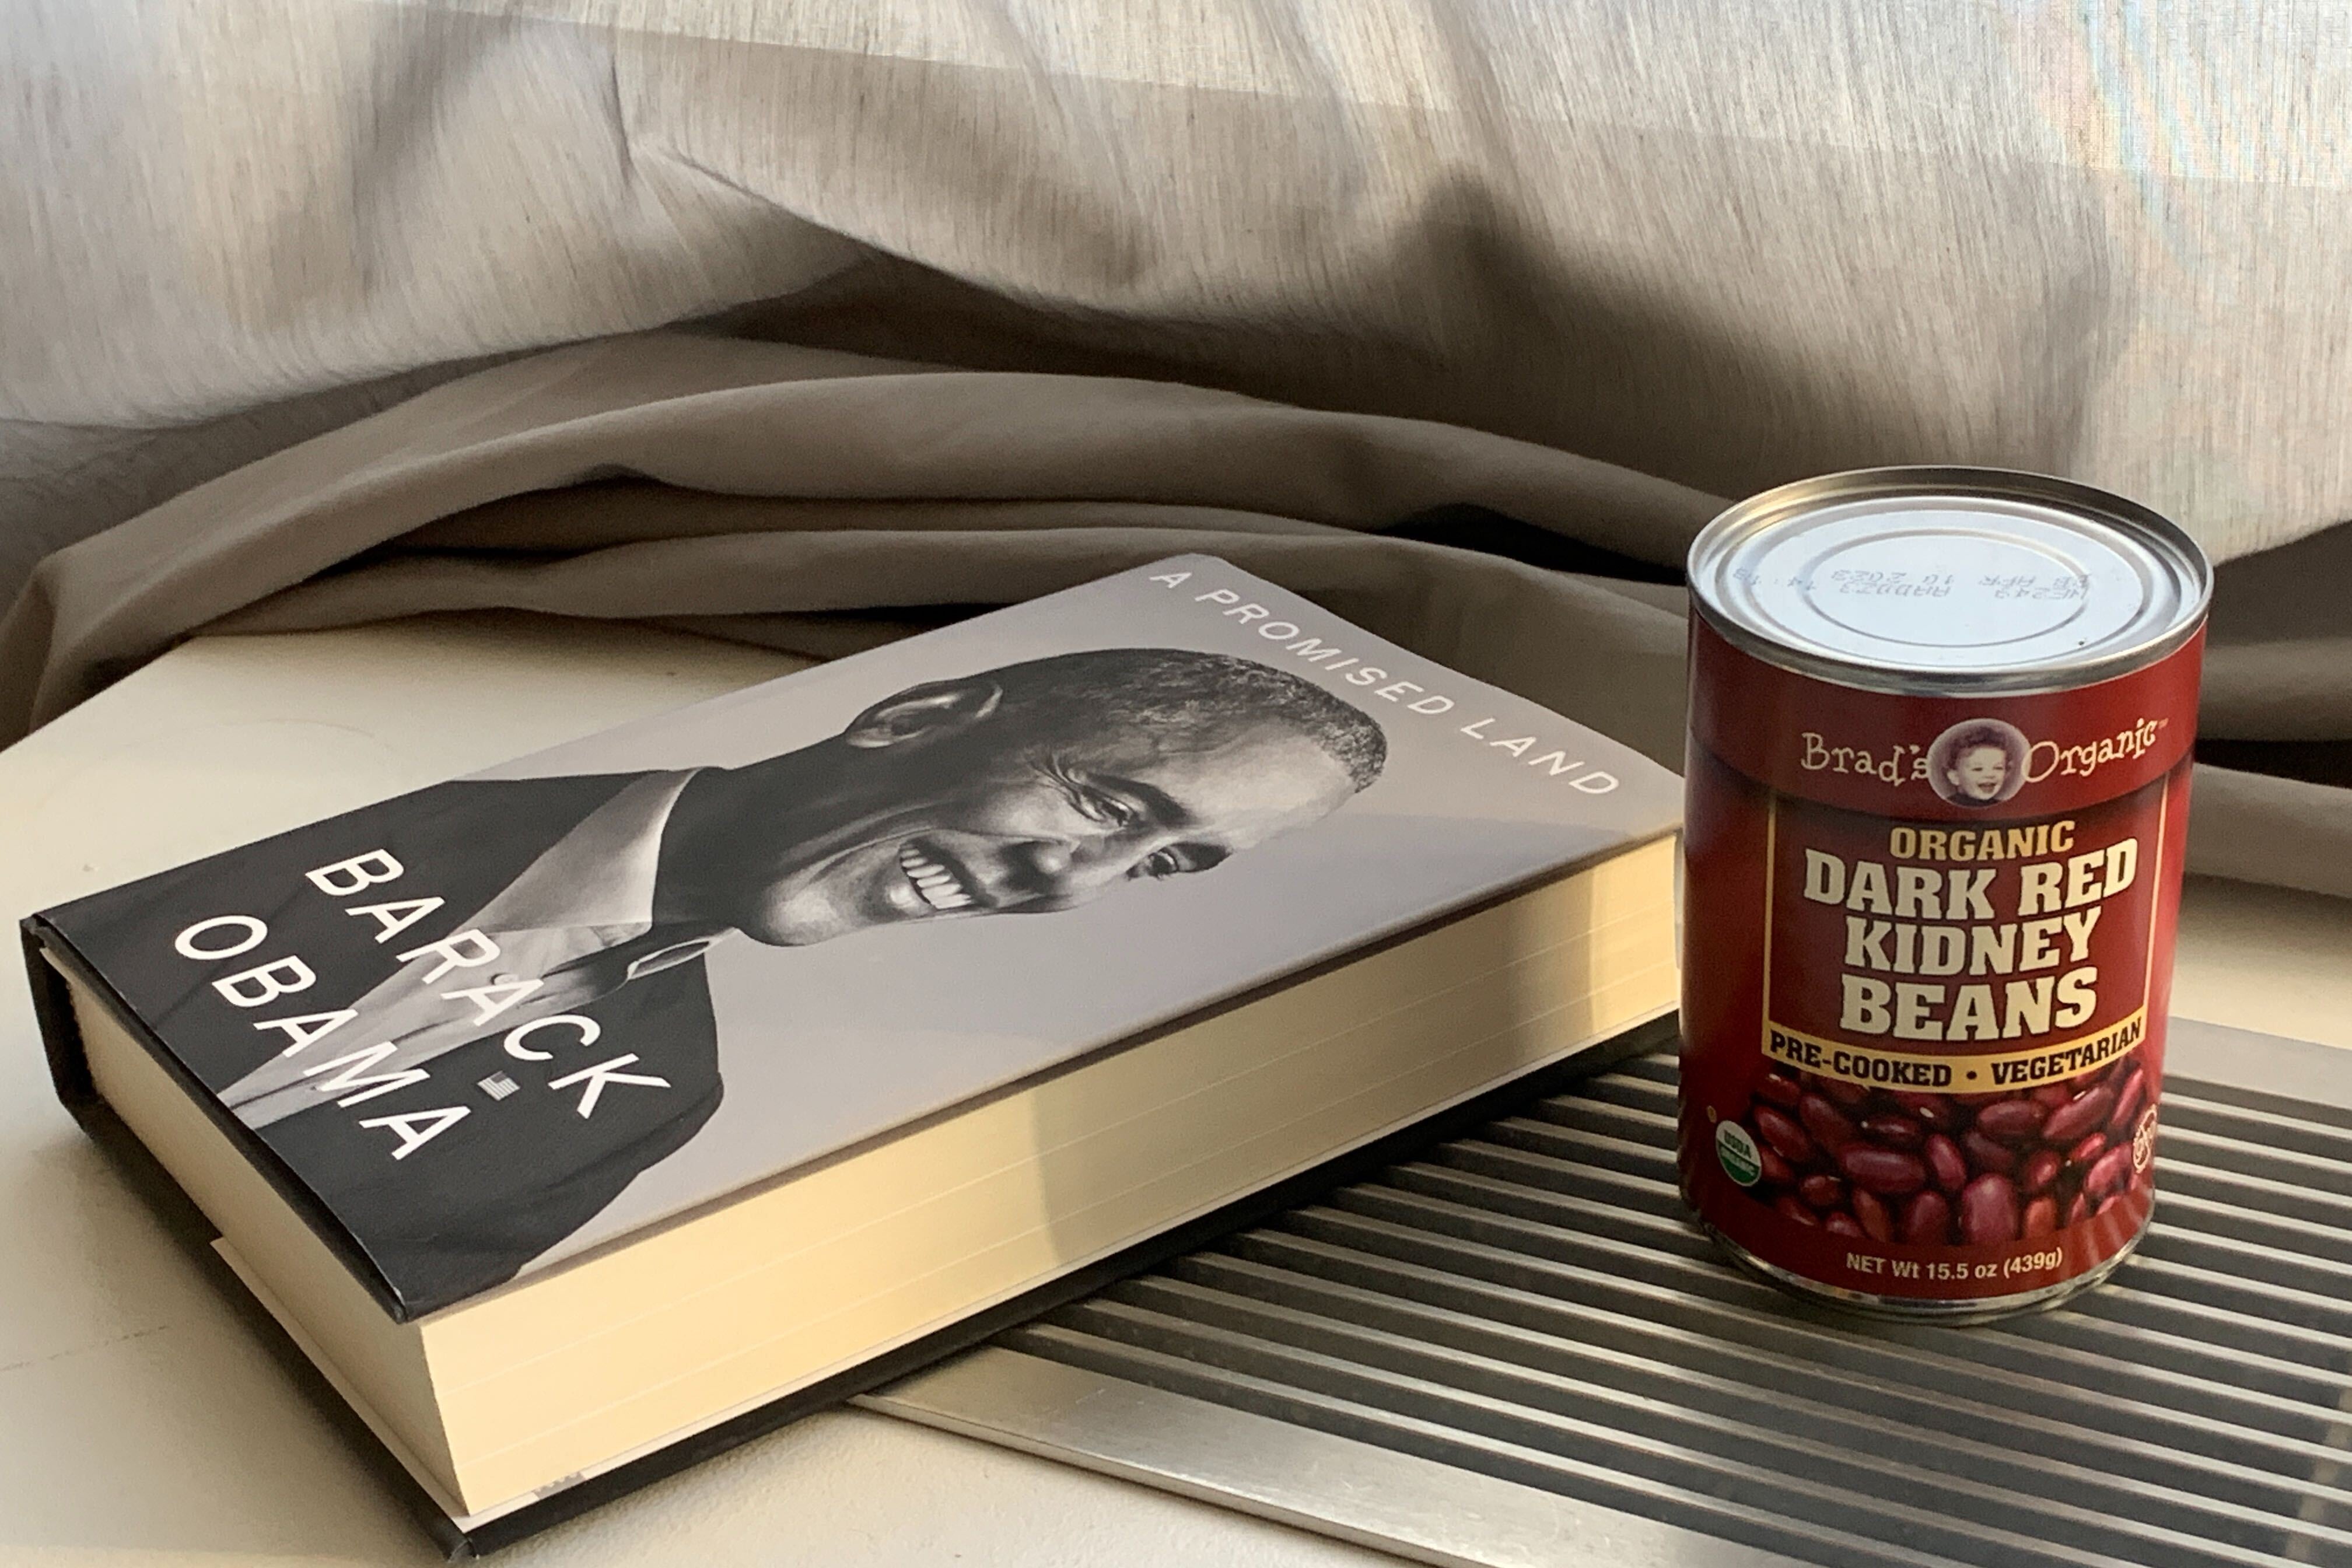 Against a gray curtain backdrop, Barack Obama's new book lies on its side in the sunlight, next to a can of red kidney beans.